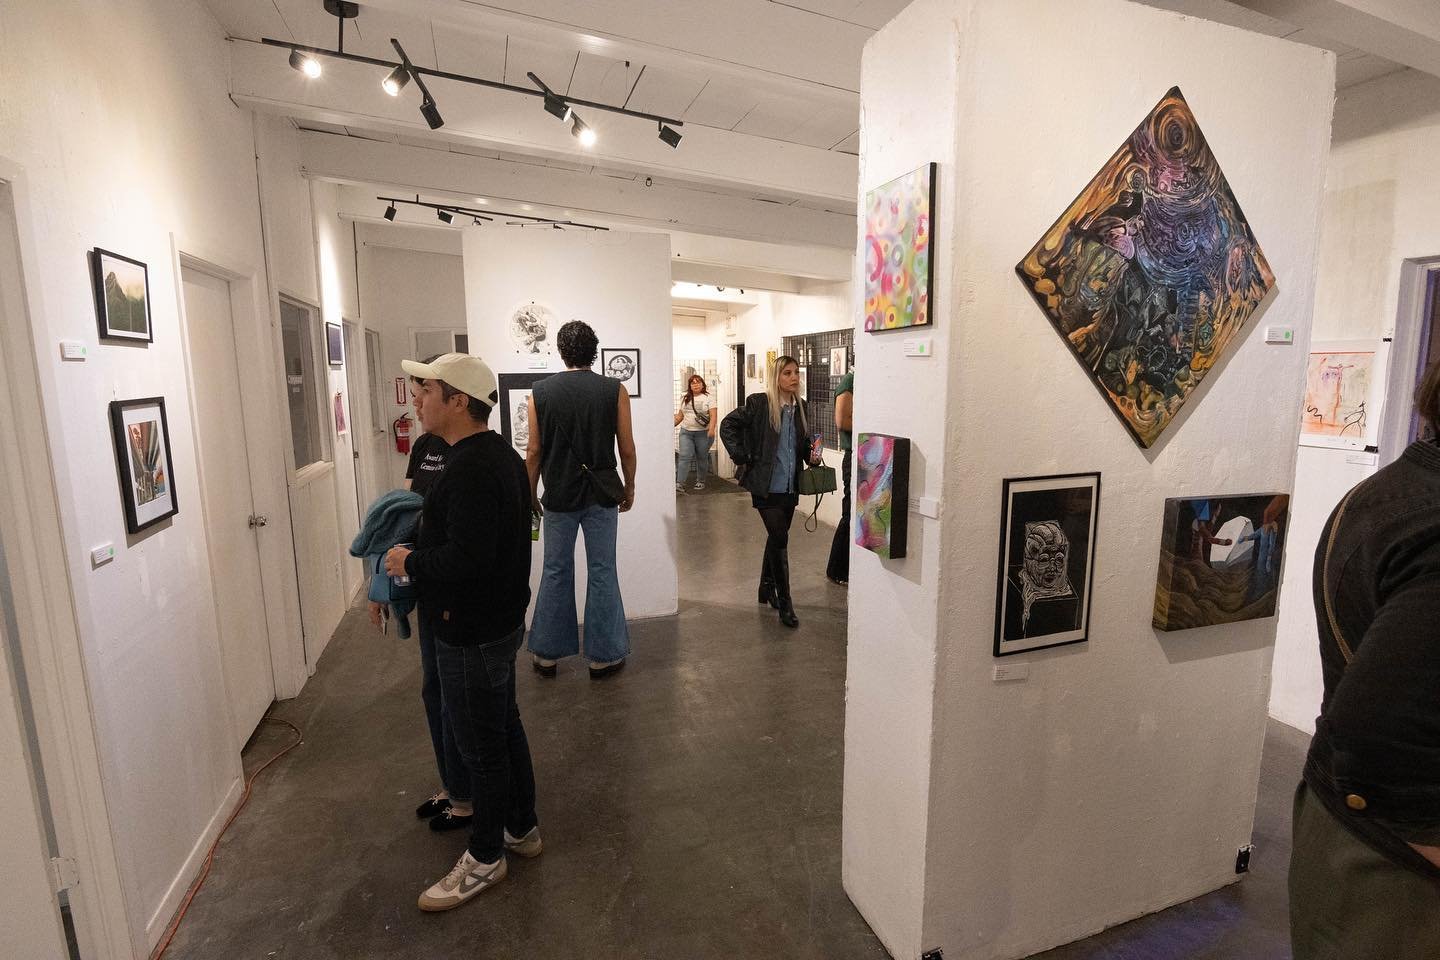 💥Grateful for the overwhelming support at our 1 Year Anniversary closing show last Thursday! Special thanks to all the generous artists who donated pieces for this exhibition, and to our amazing guests who bid on them! The proceeds will profoundly b